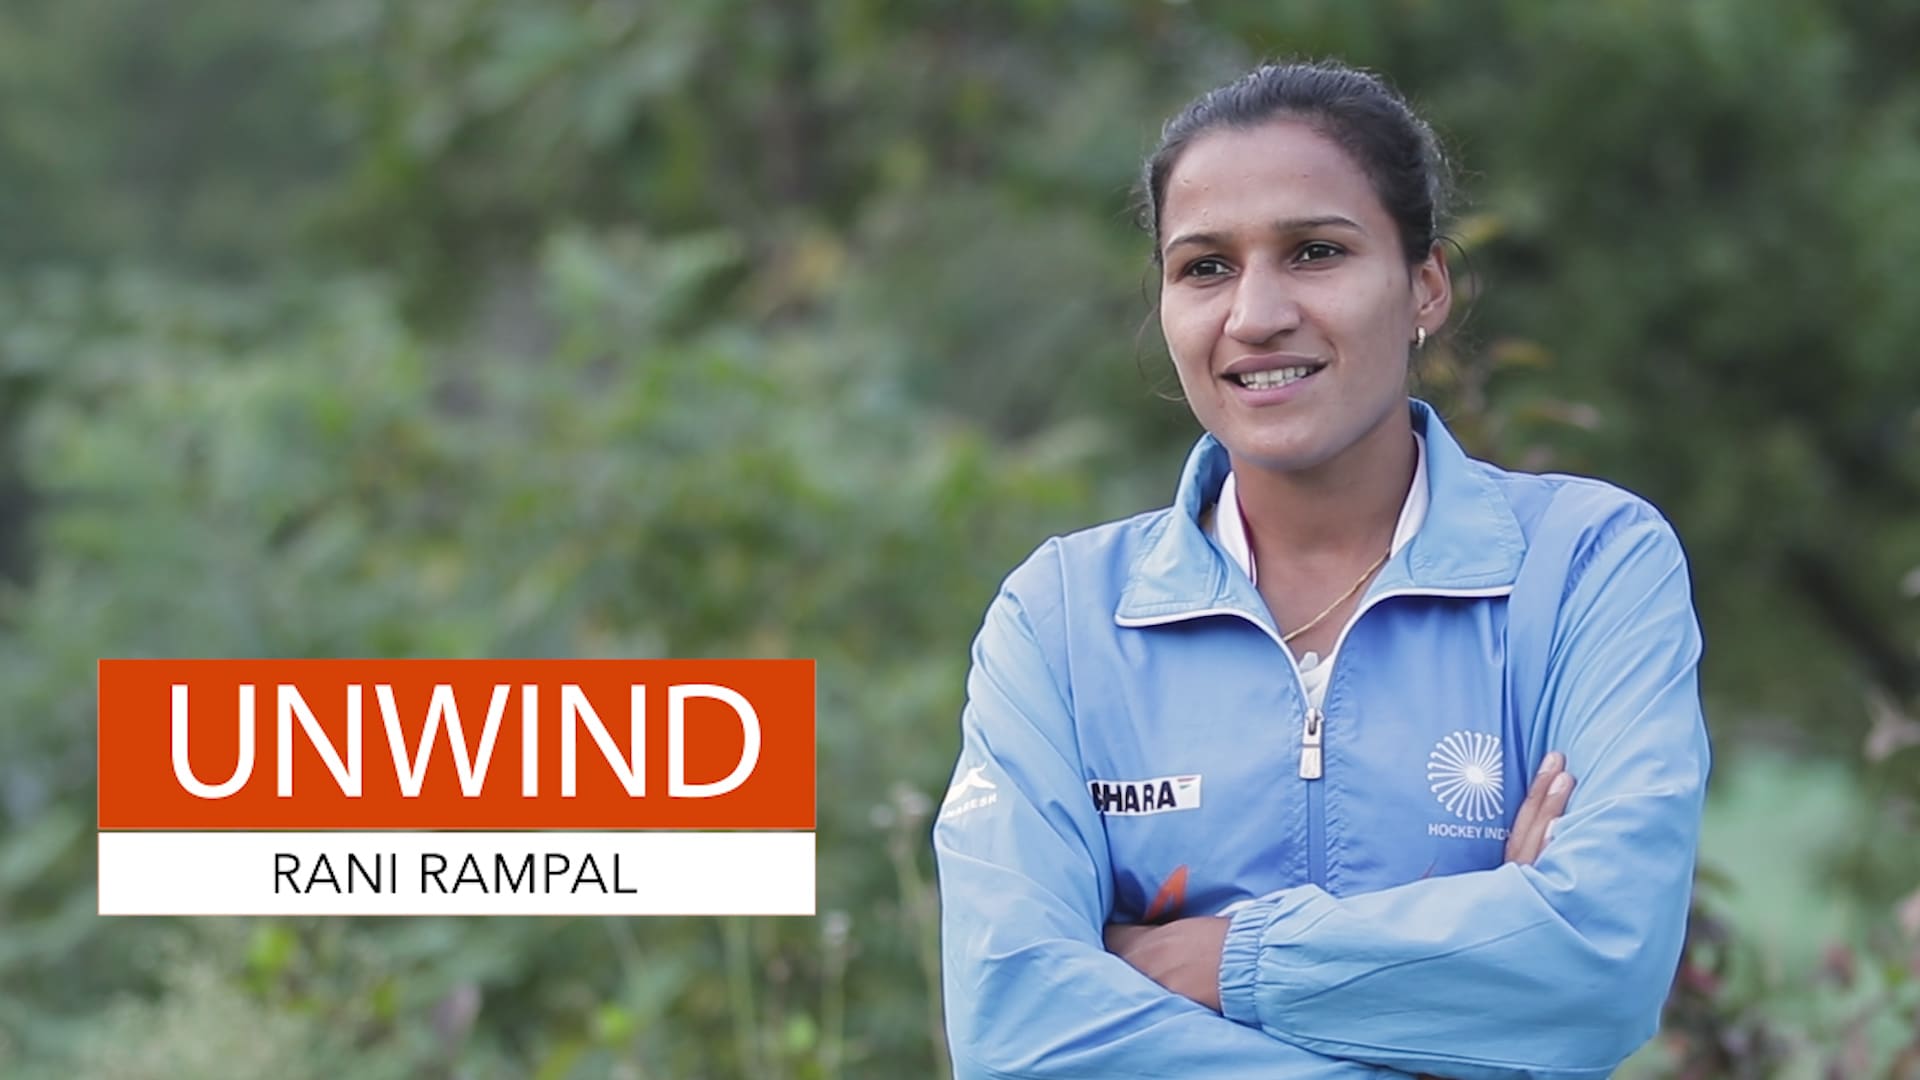 6 facts to know about Rani Rampal, captain of the Indian women's